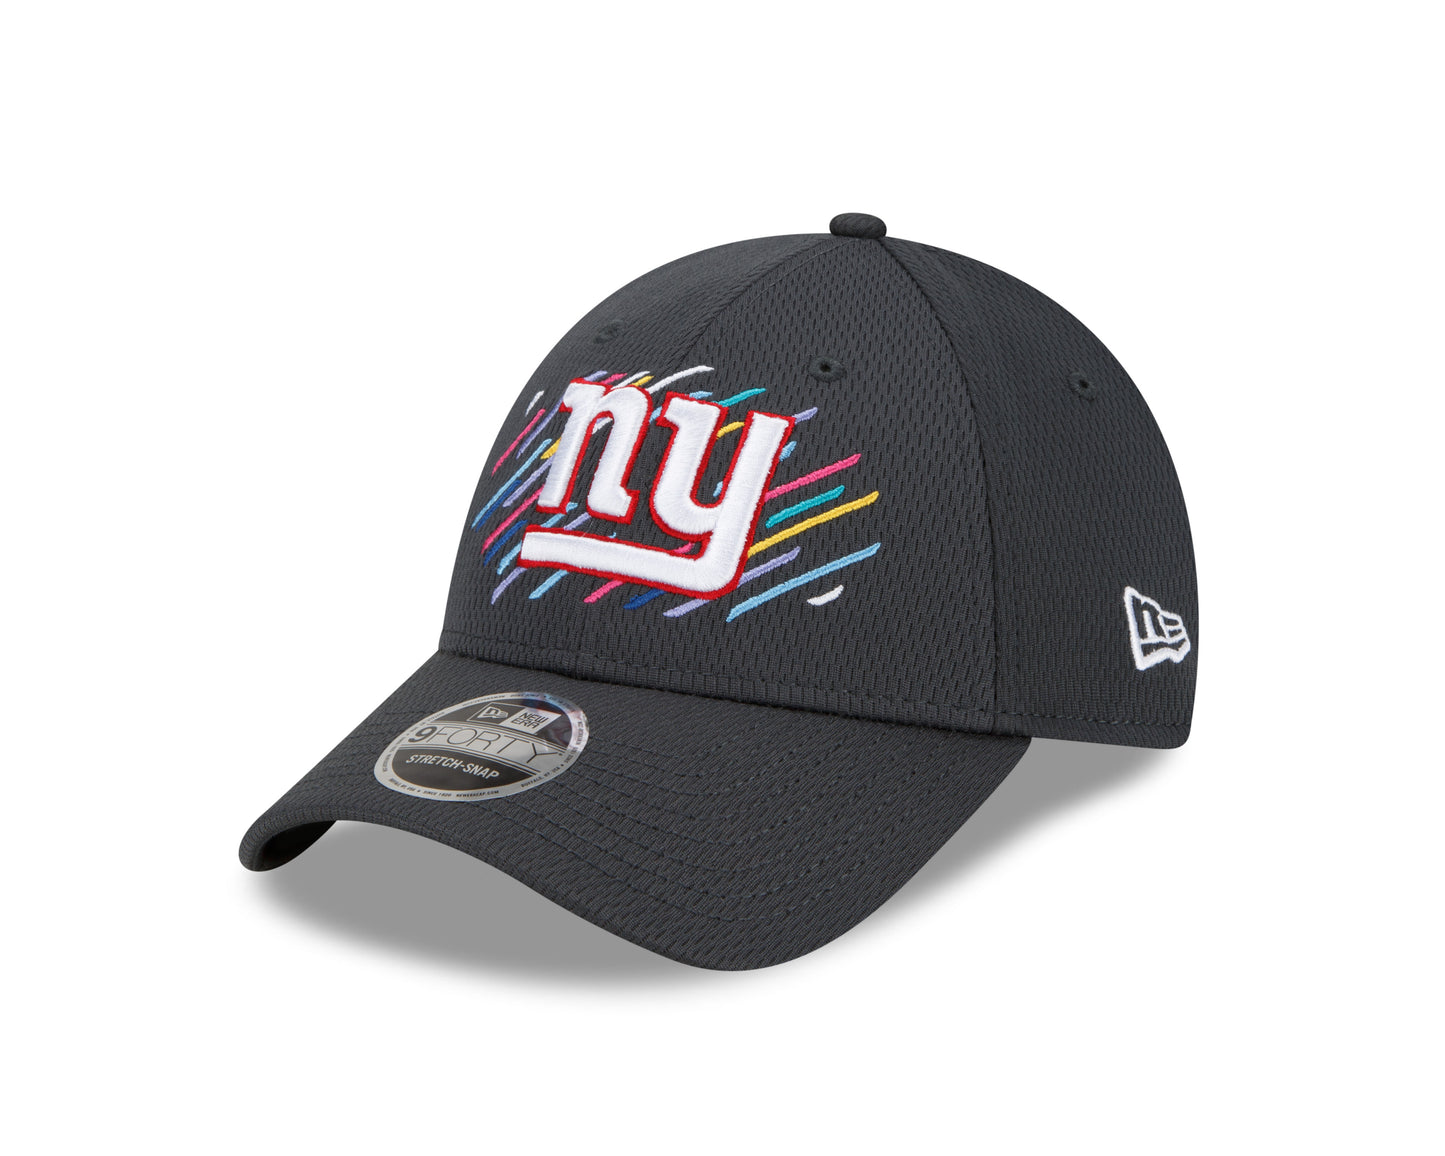 New York Giants New Era NFL Crucial Catch Official 9FORTY Adjustable Hat